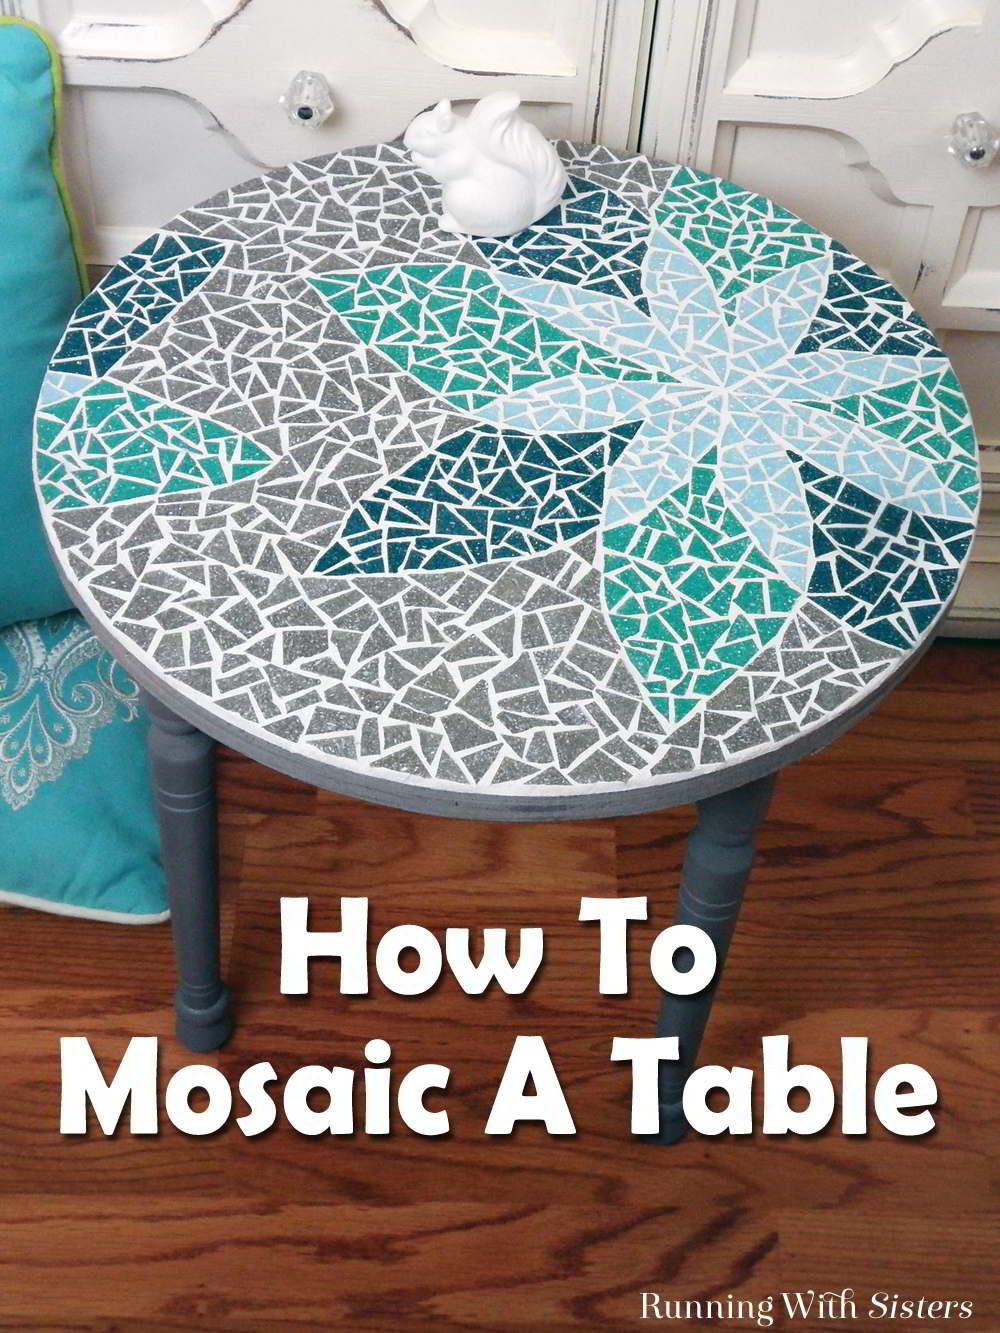 DIY Outdoor Mosaic Table
 How To Mosaic A Table